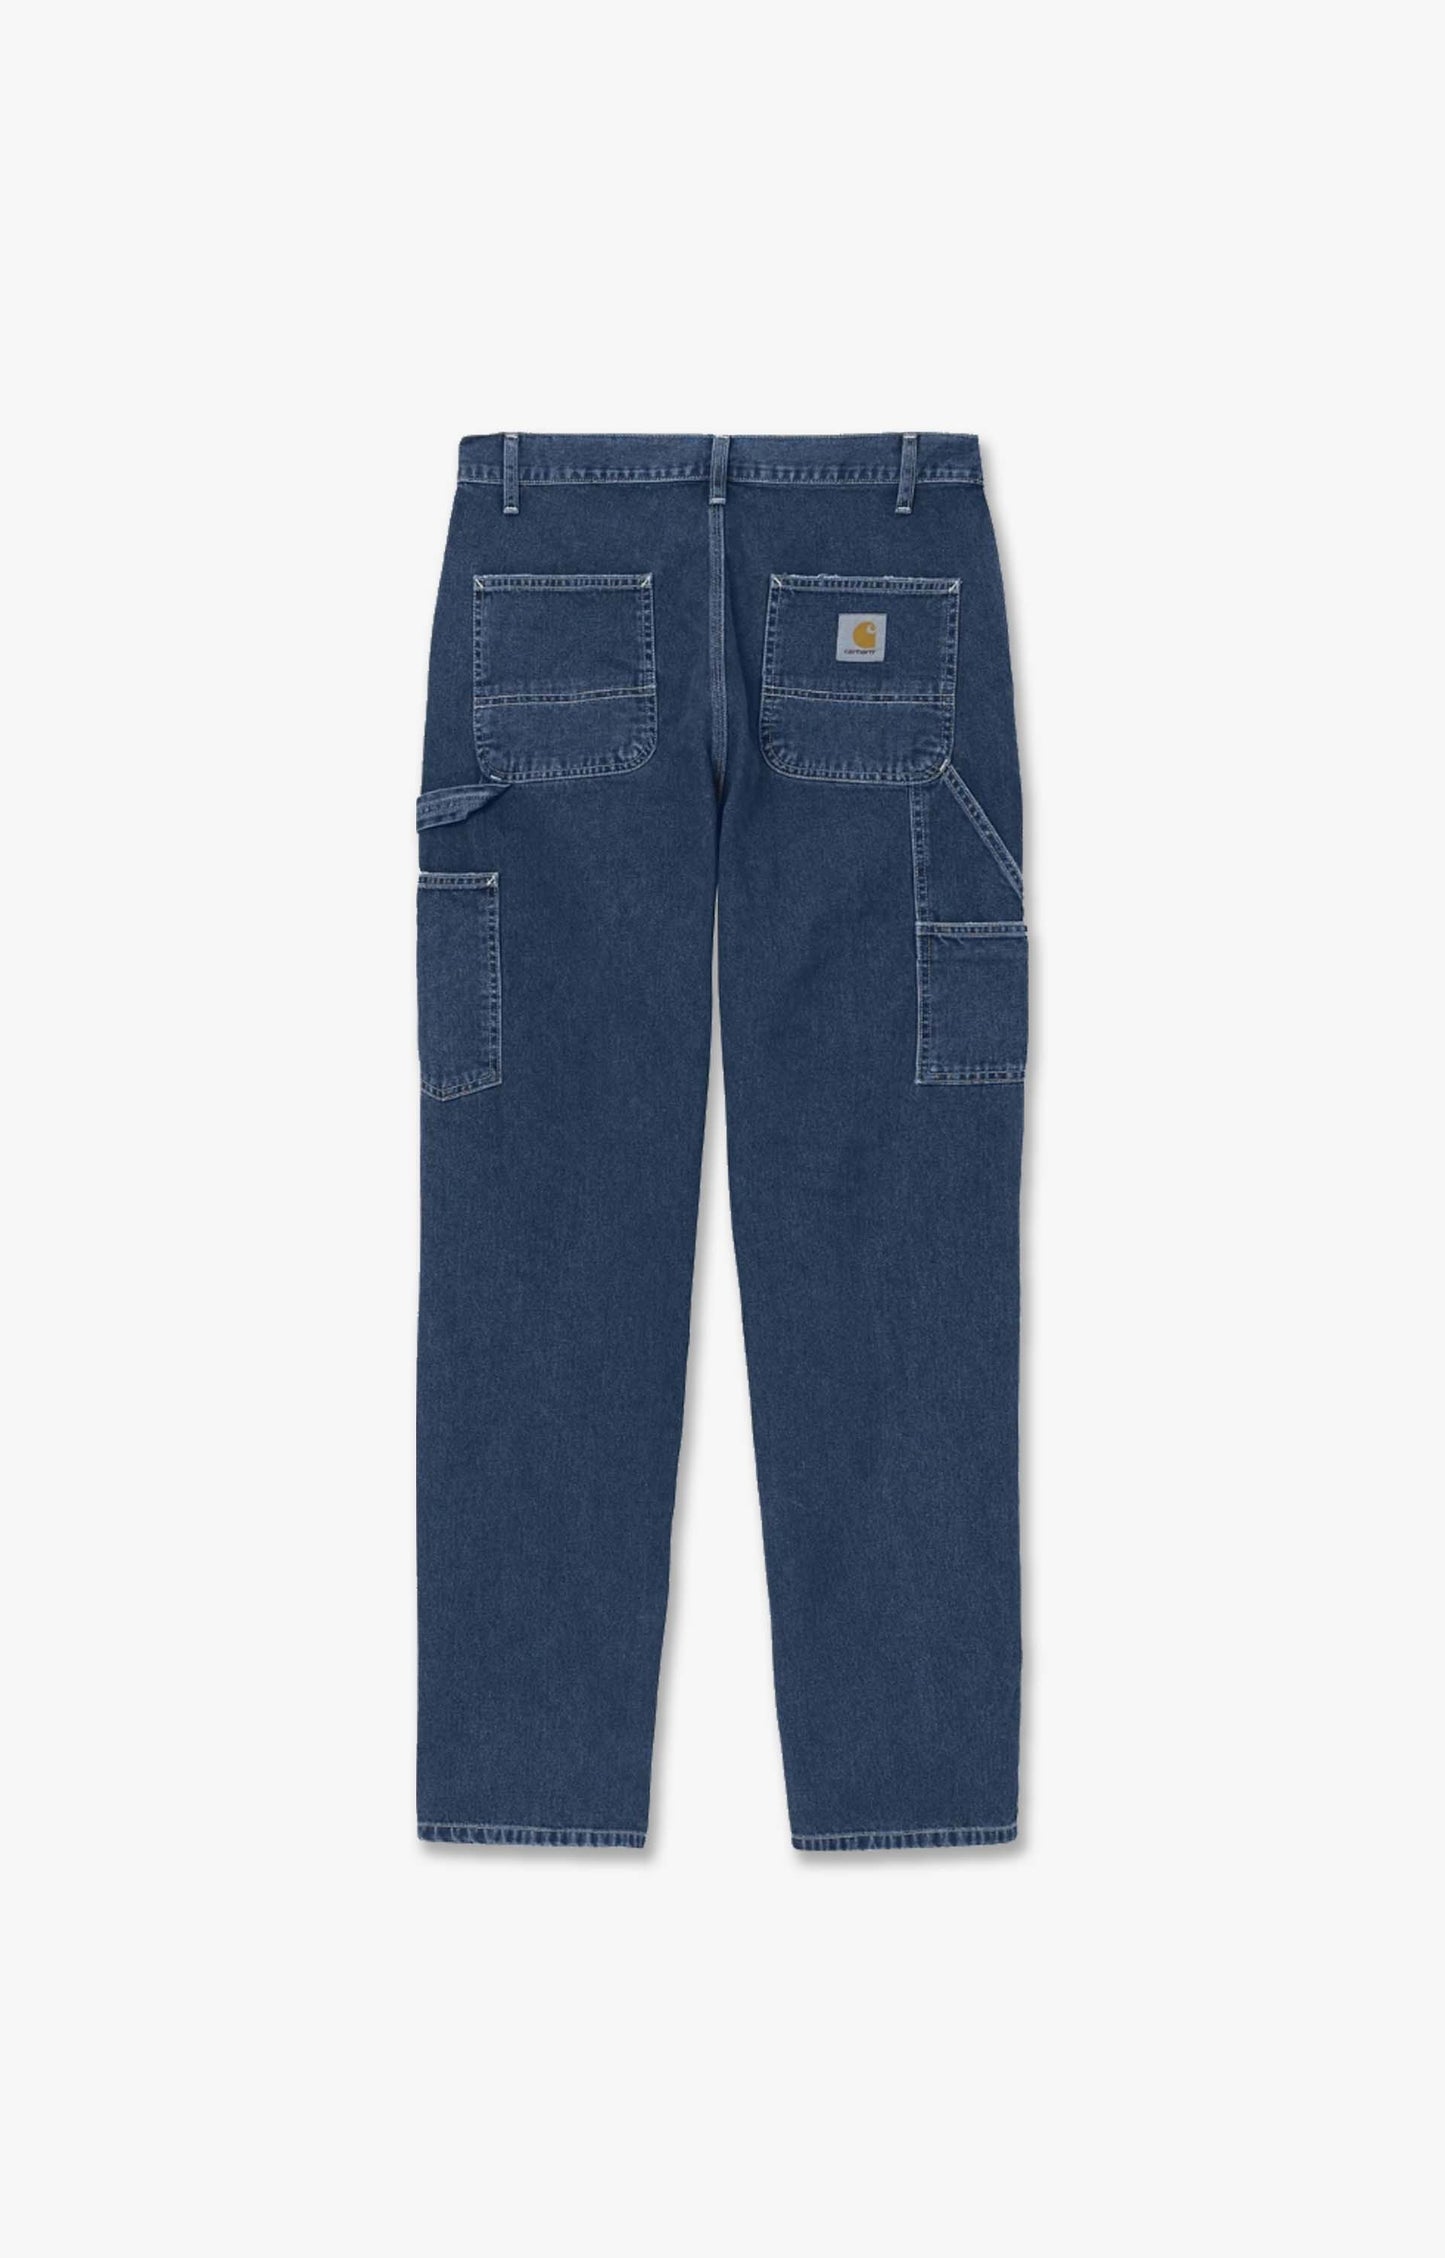 Carhartt WIP Ruck Single Knee Pant, Blue Stone Washed